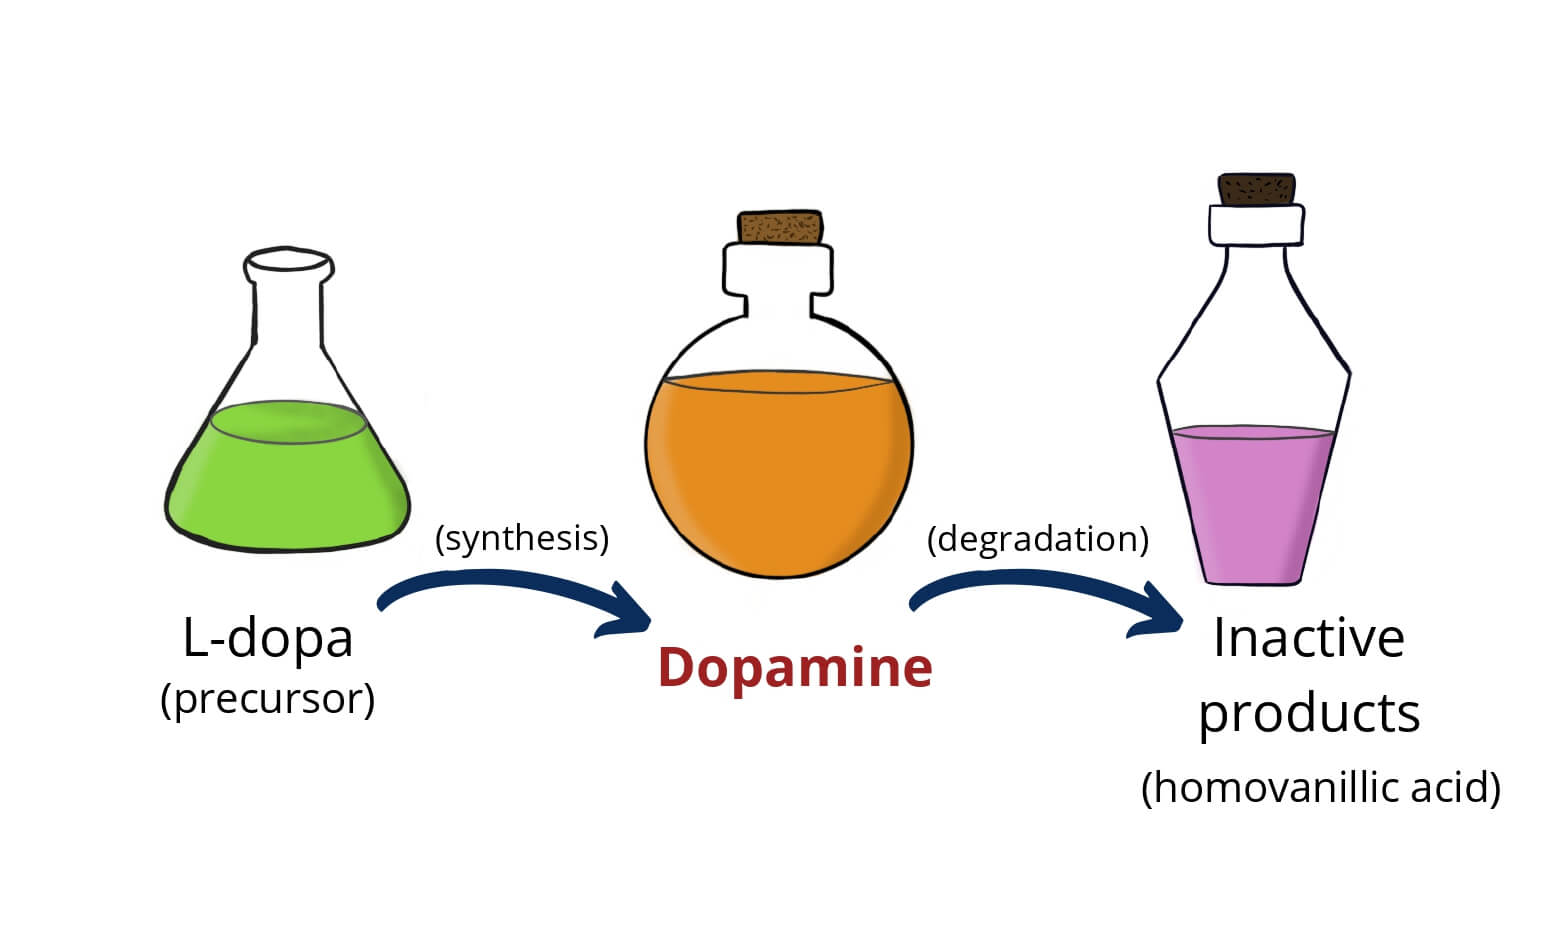 Dopamine synthesis and degradation